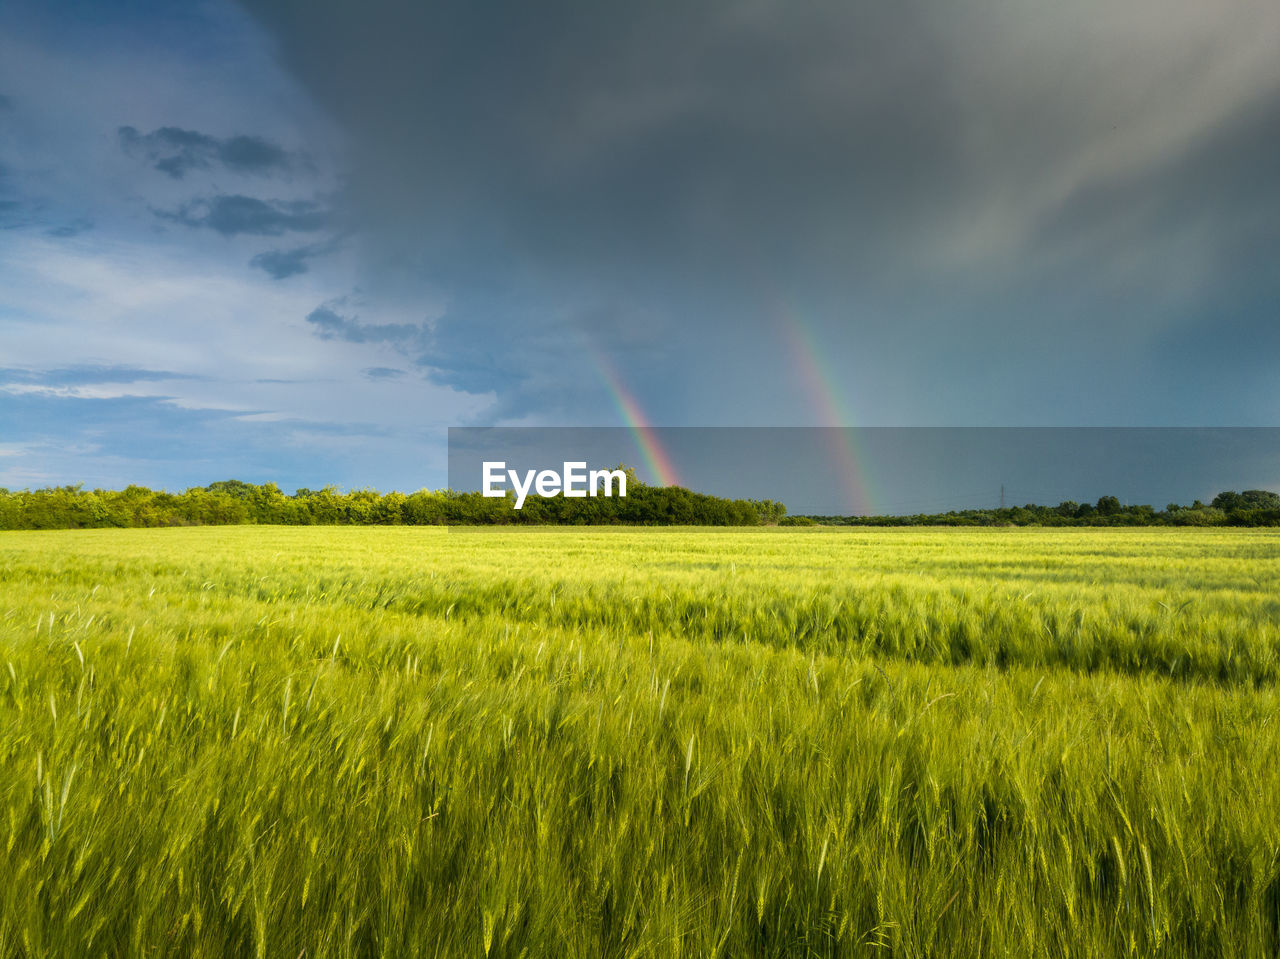 A double rainbow in front of gloomy clouds above an field planted with wheat during a summer evening